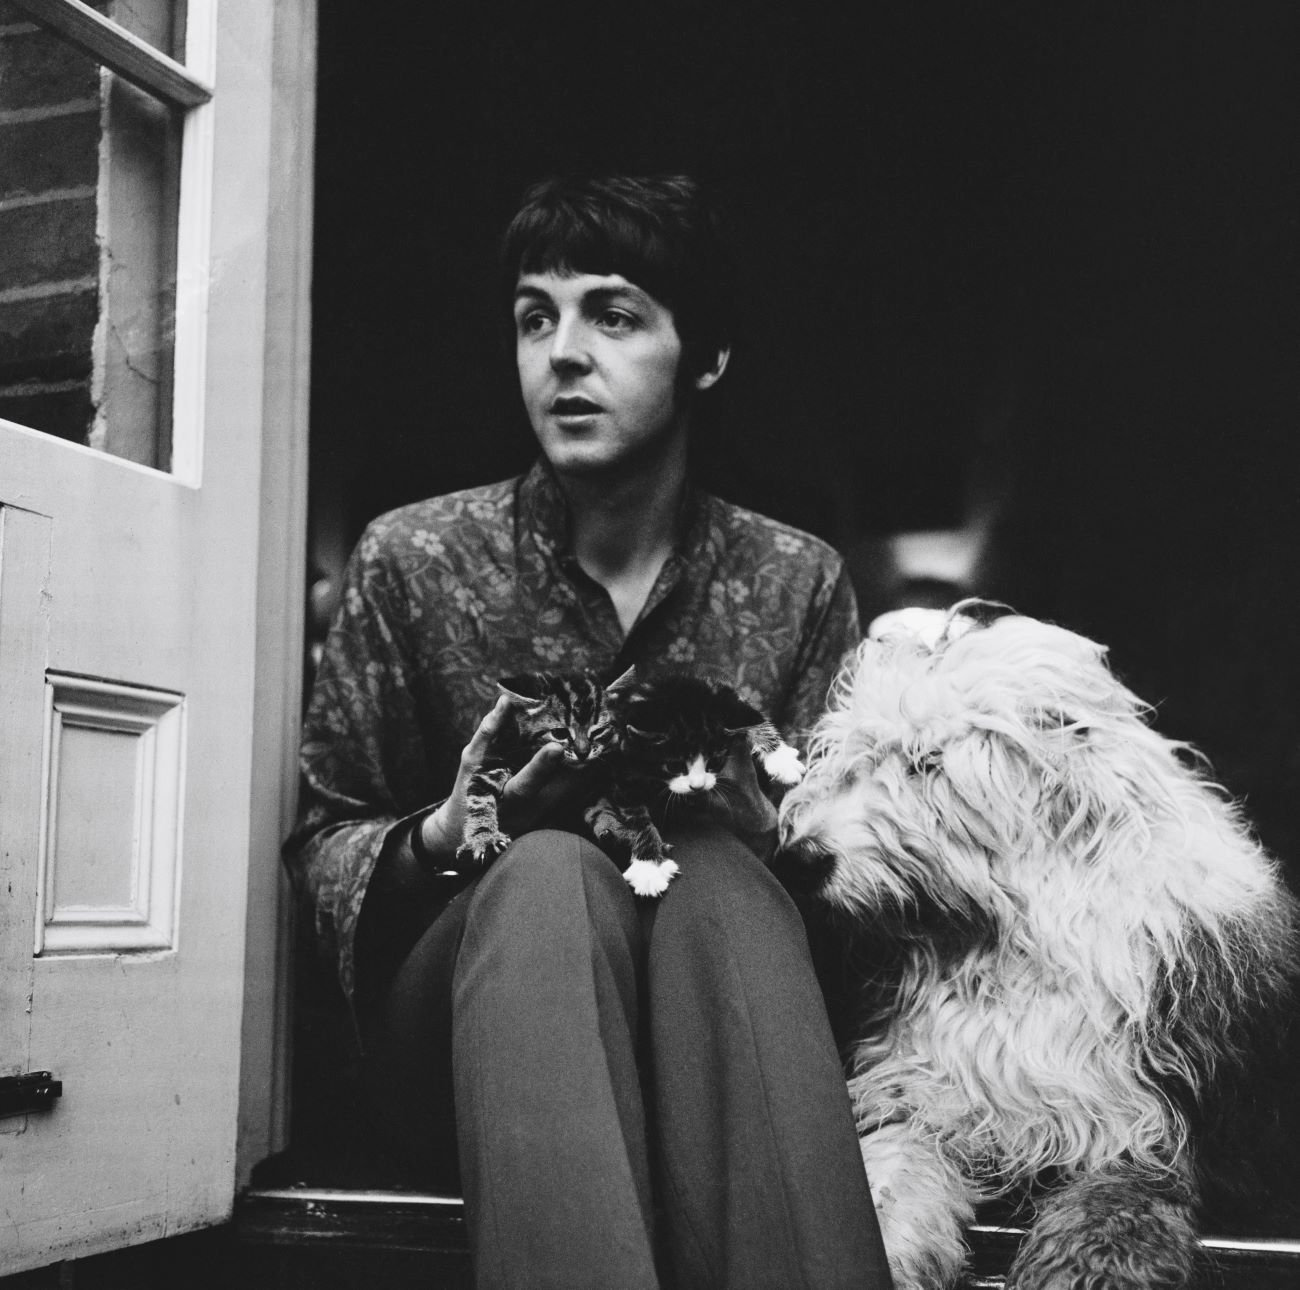 A black and white picture of Paul McCartney sitting in a doorway with a dog.